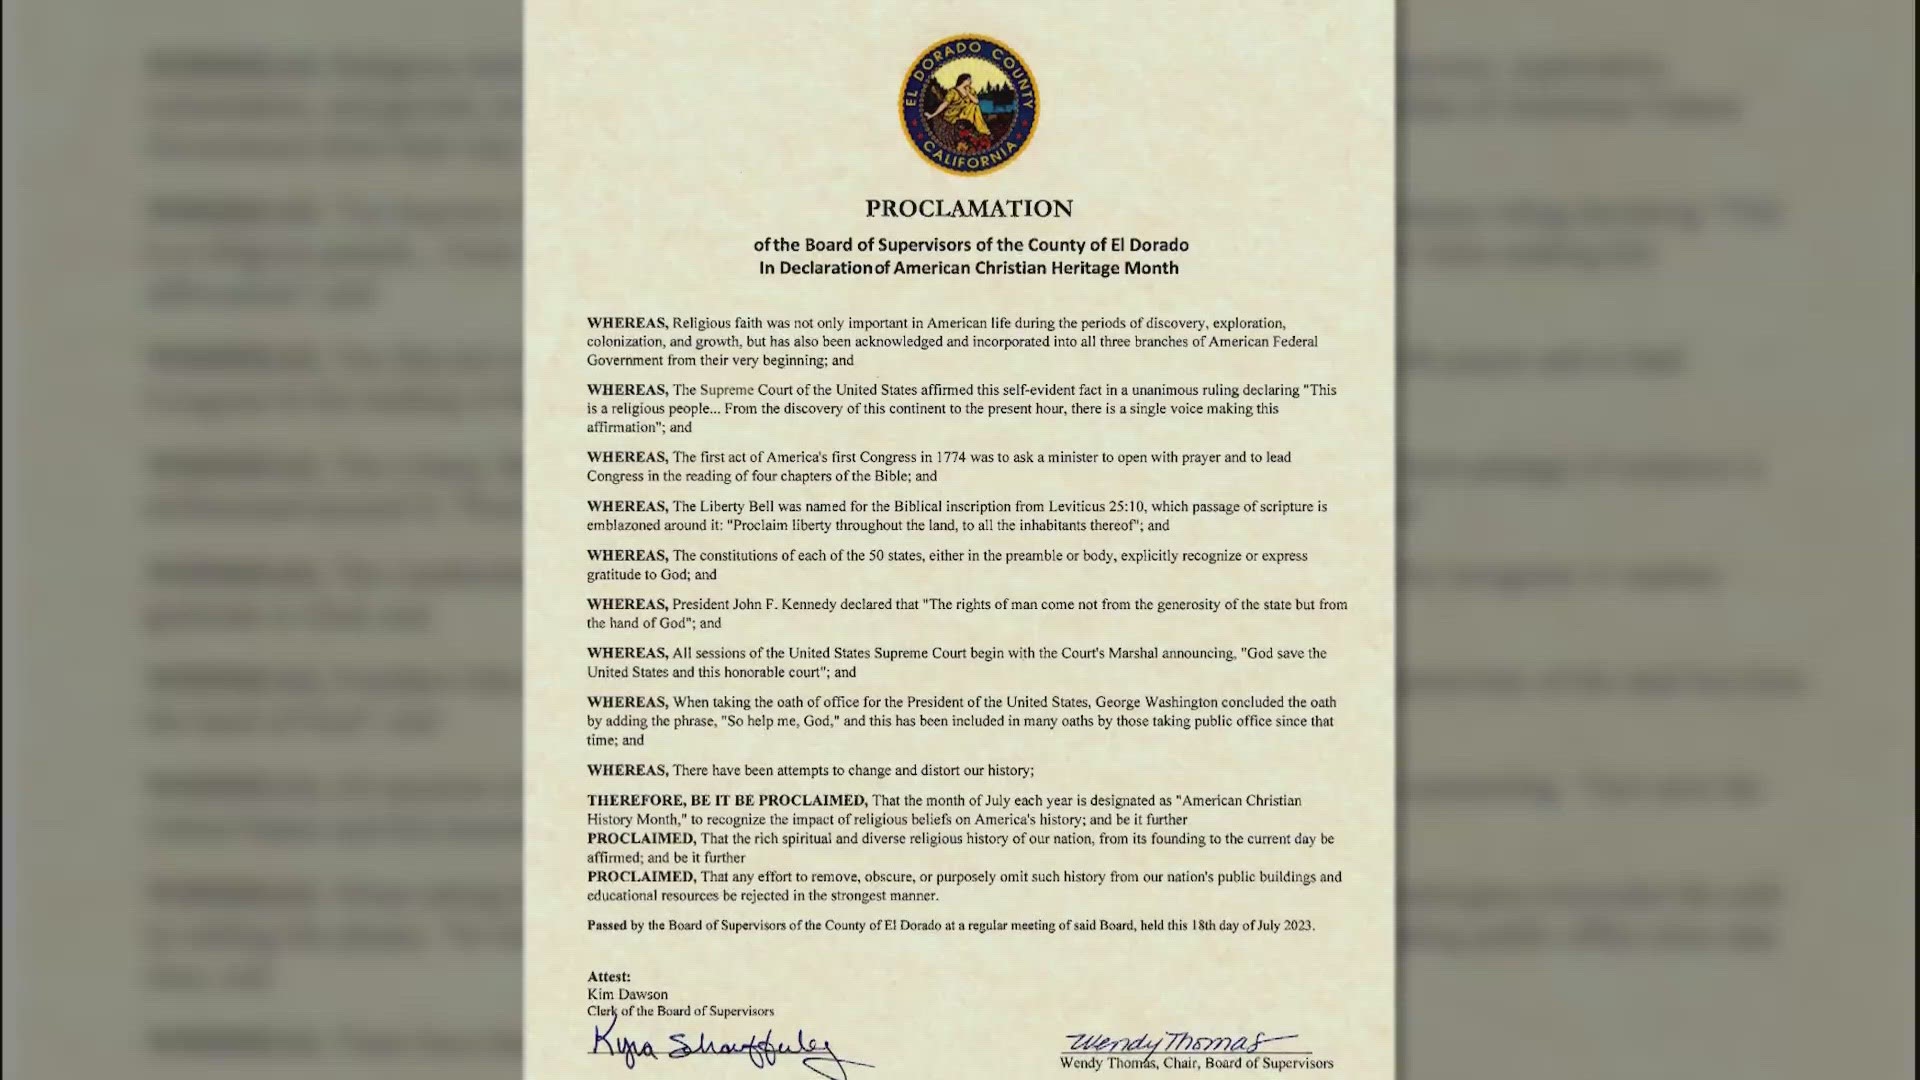 The El Dorado County Board of Supervisors recently voted to add a new heritage month to the calendar — American Christian Heritage Month.